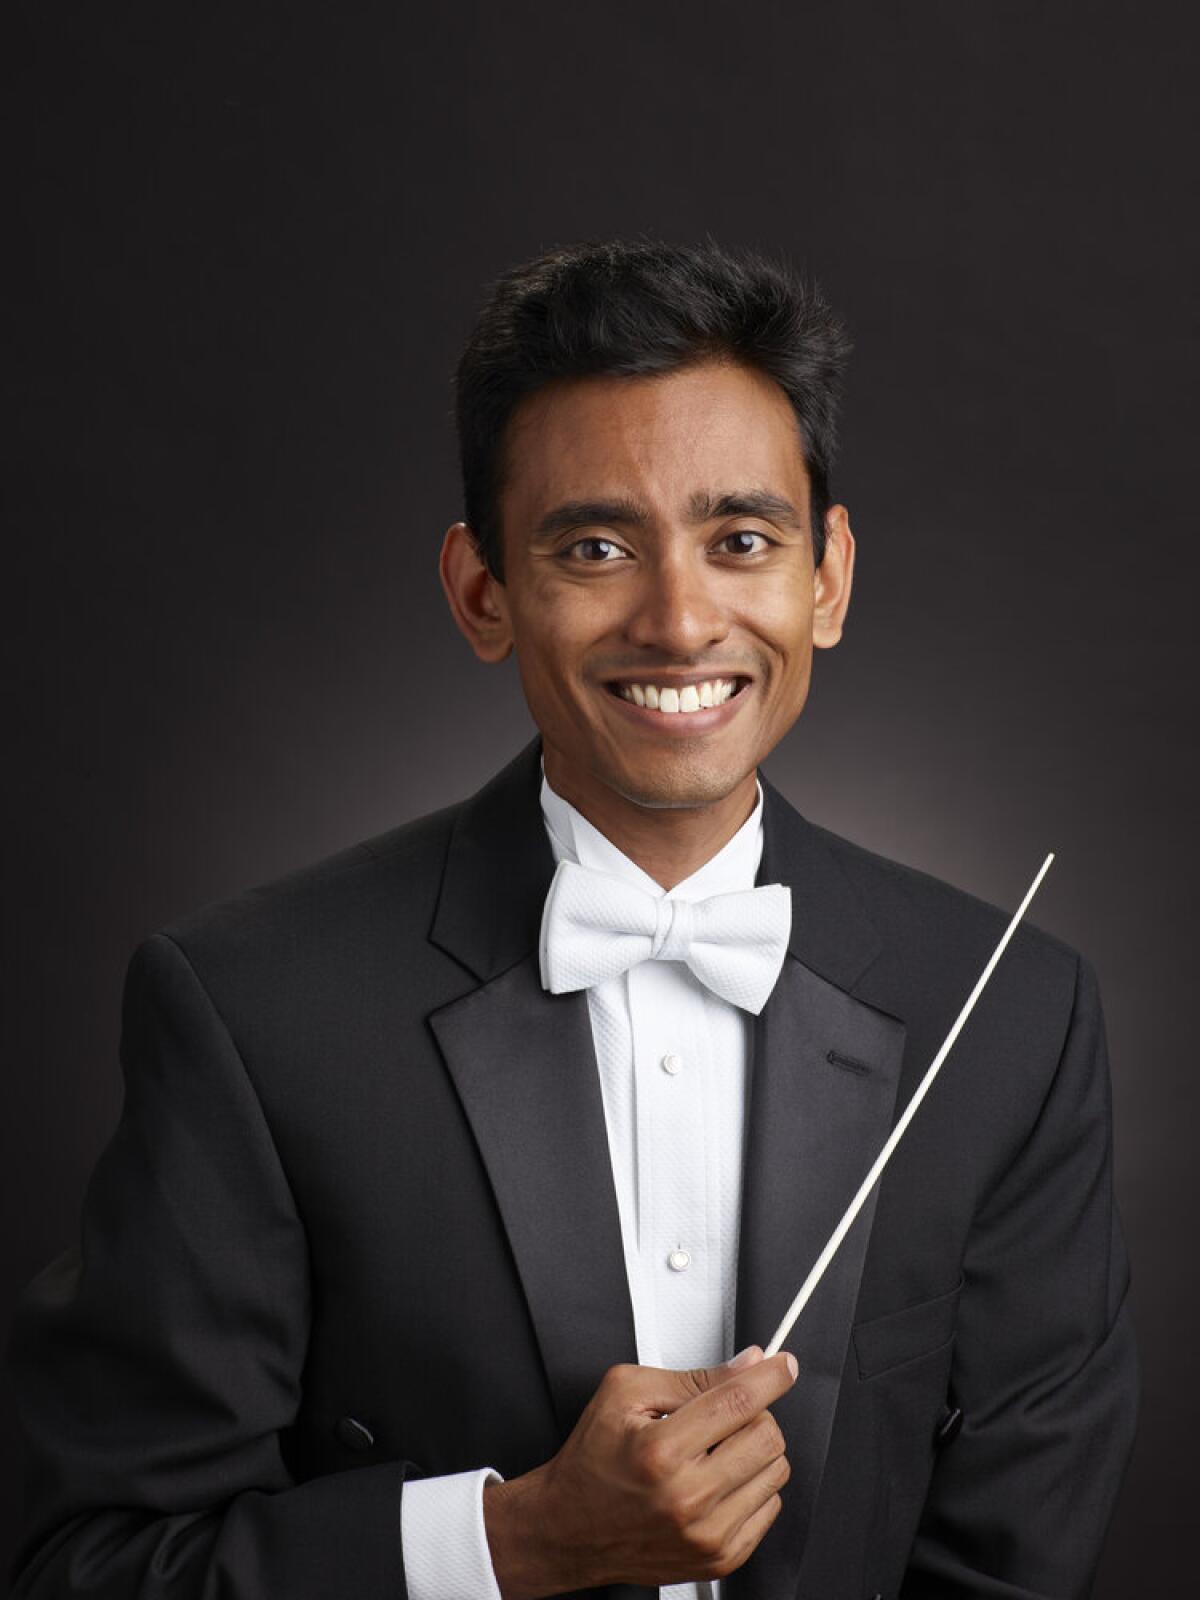 A conductor holds a baton and poses for the camera.